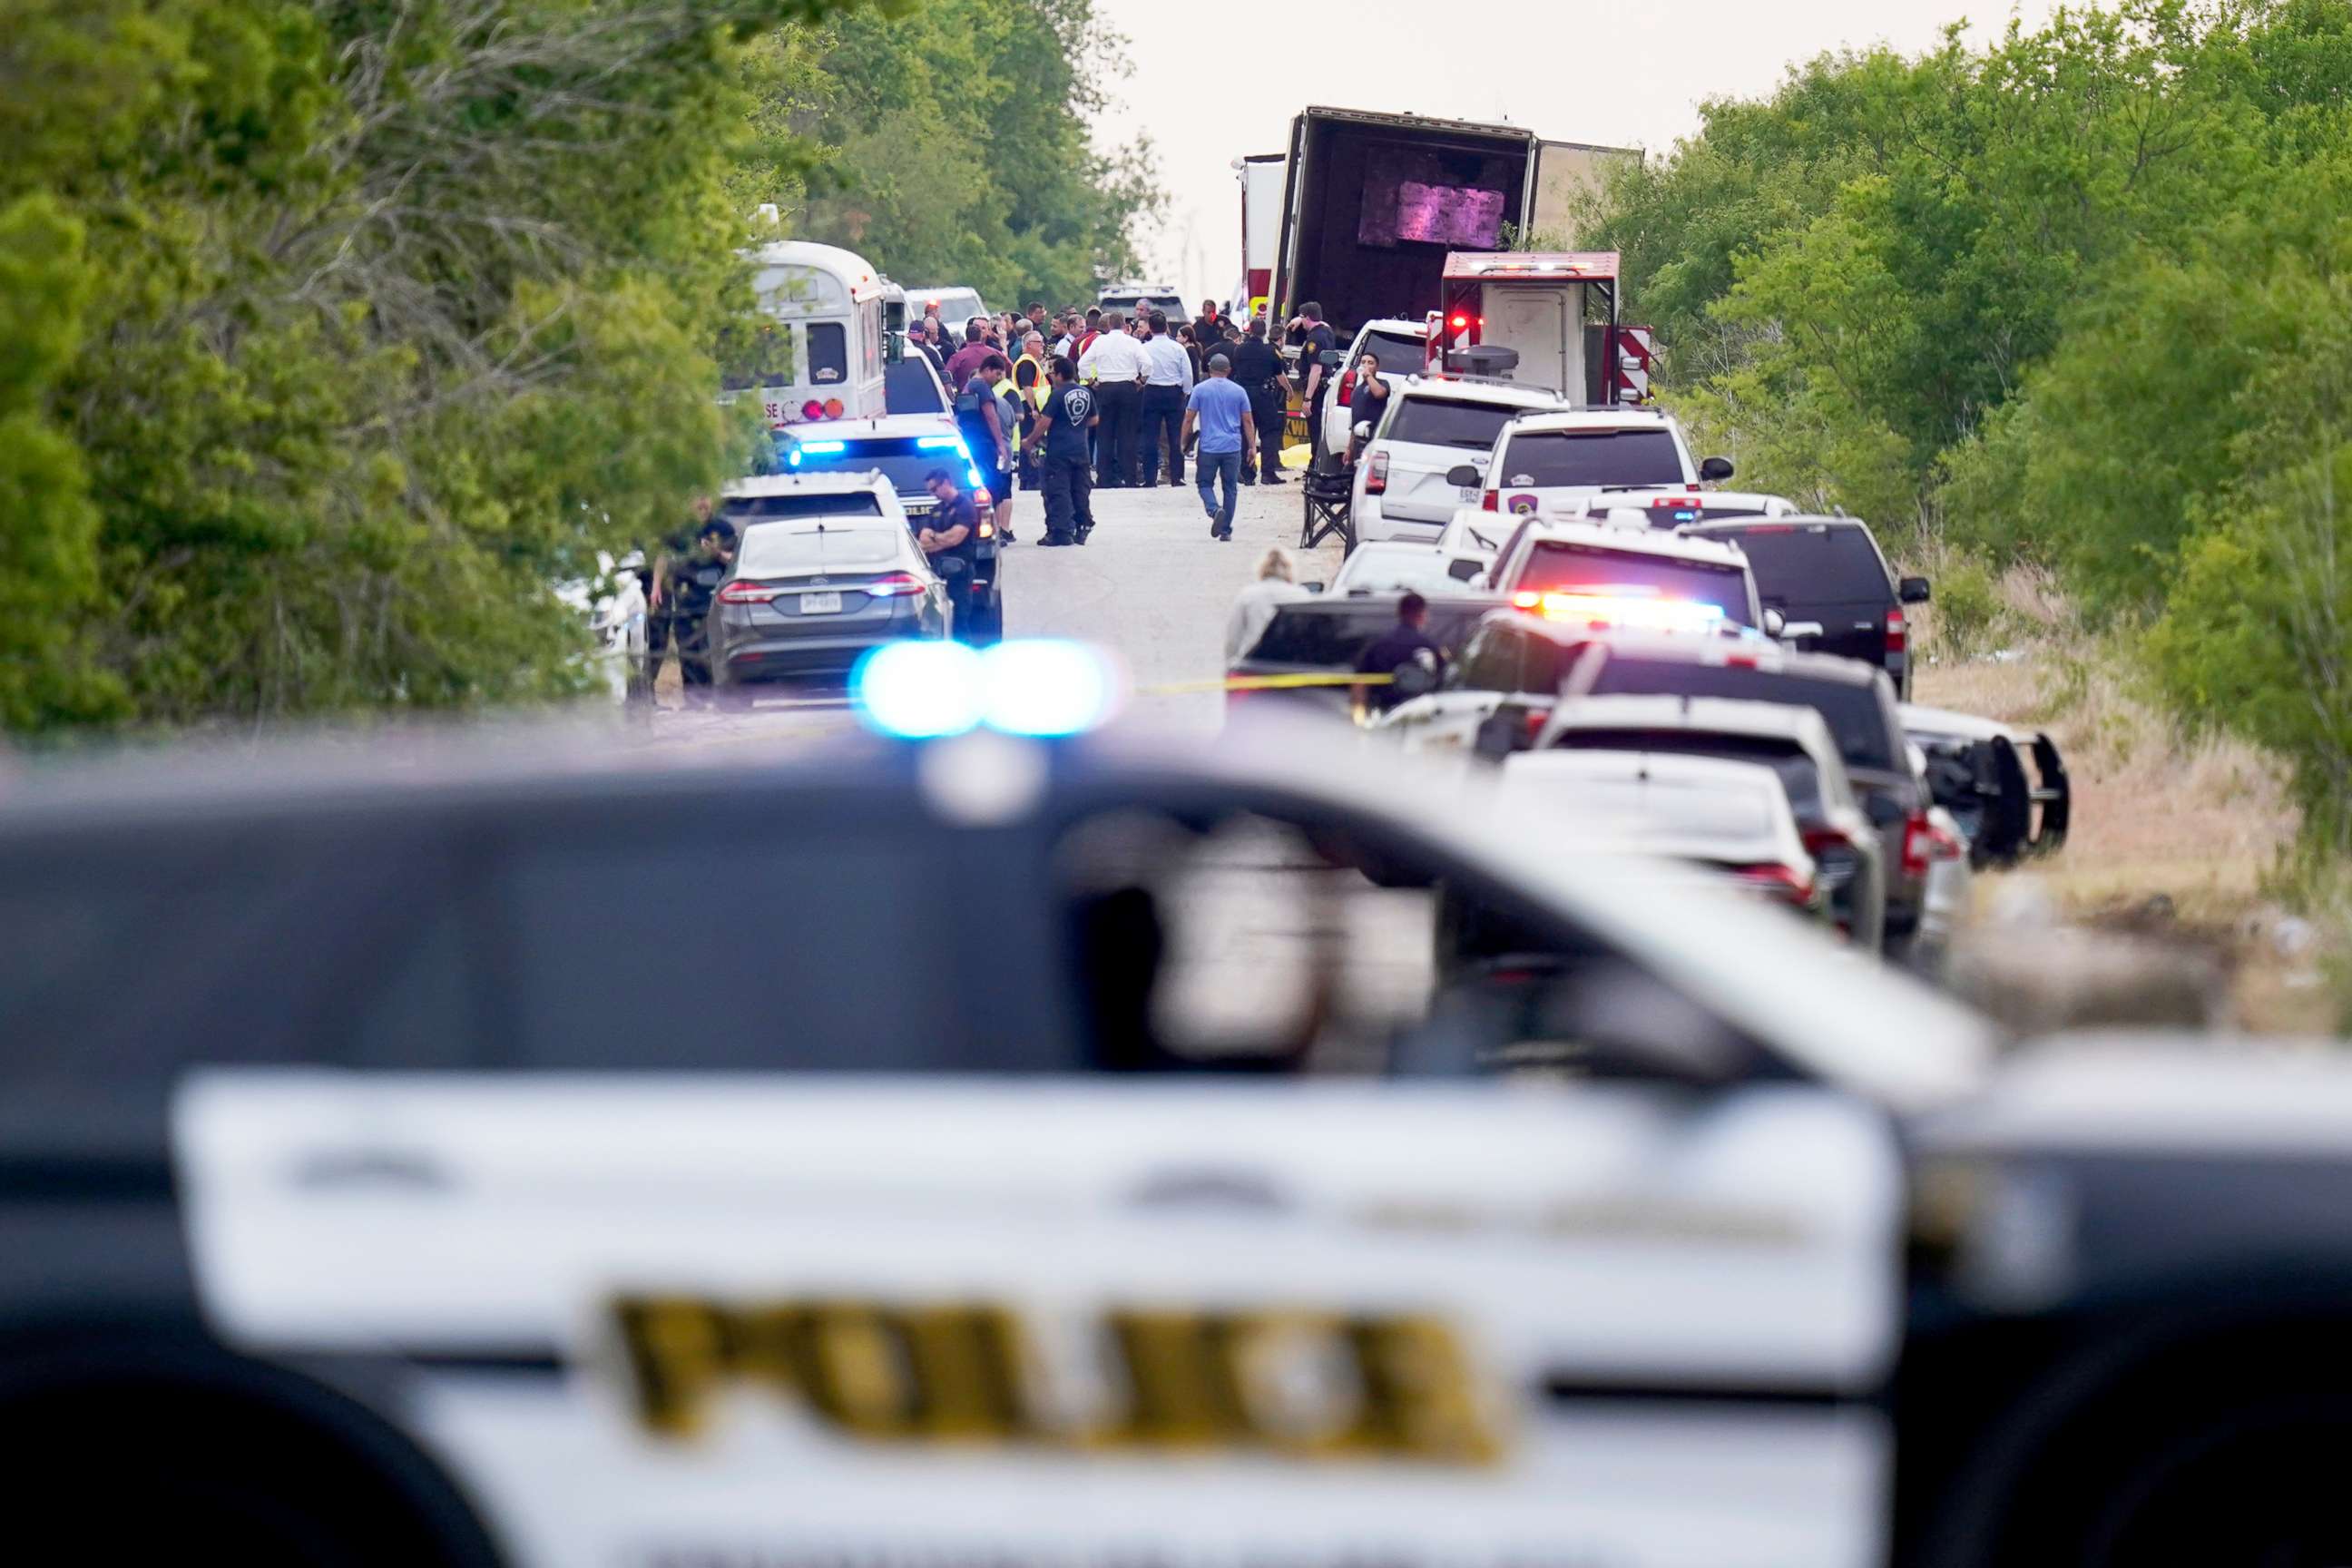 PHOTO: Police block the scene where a tractor trailer with multiple dead bodies was discovered in San Antonio, Texas June 27, 2022.